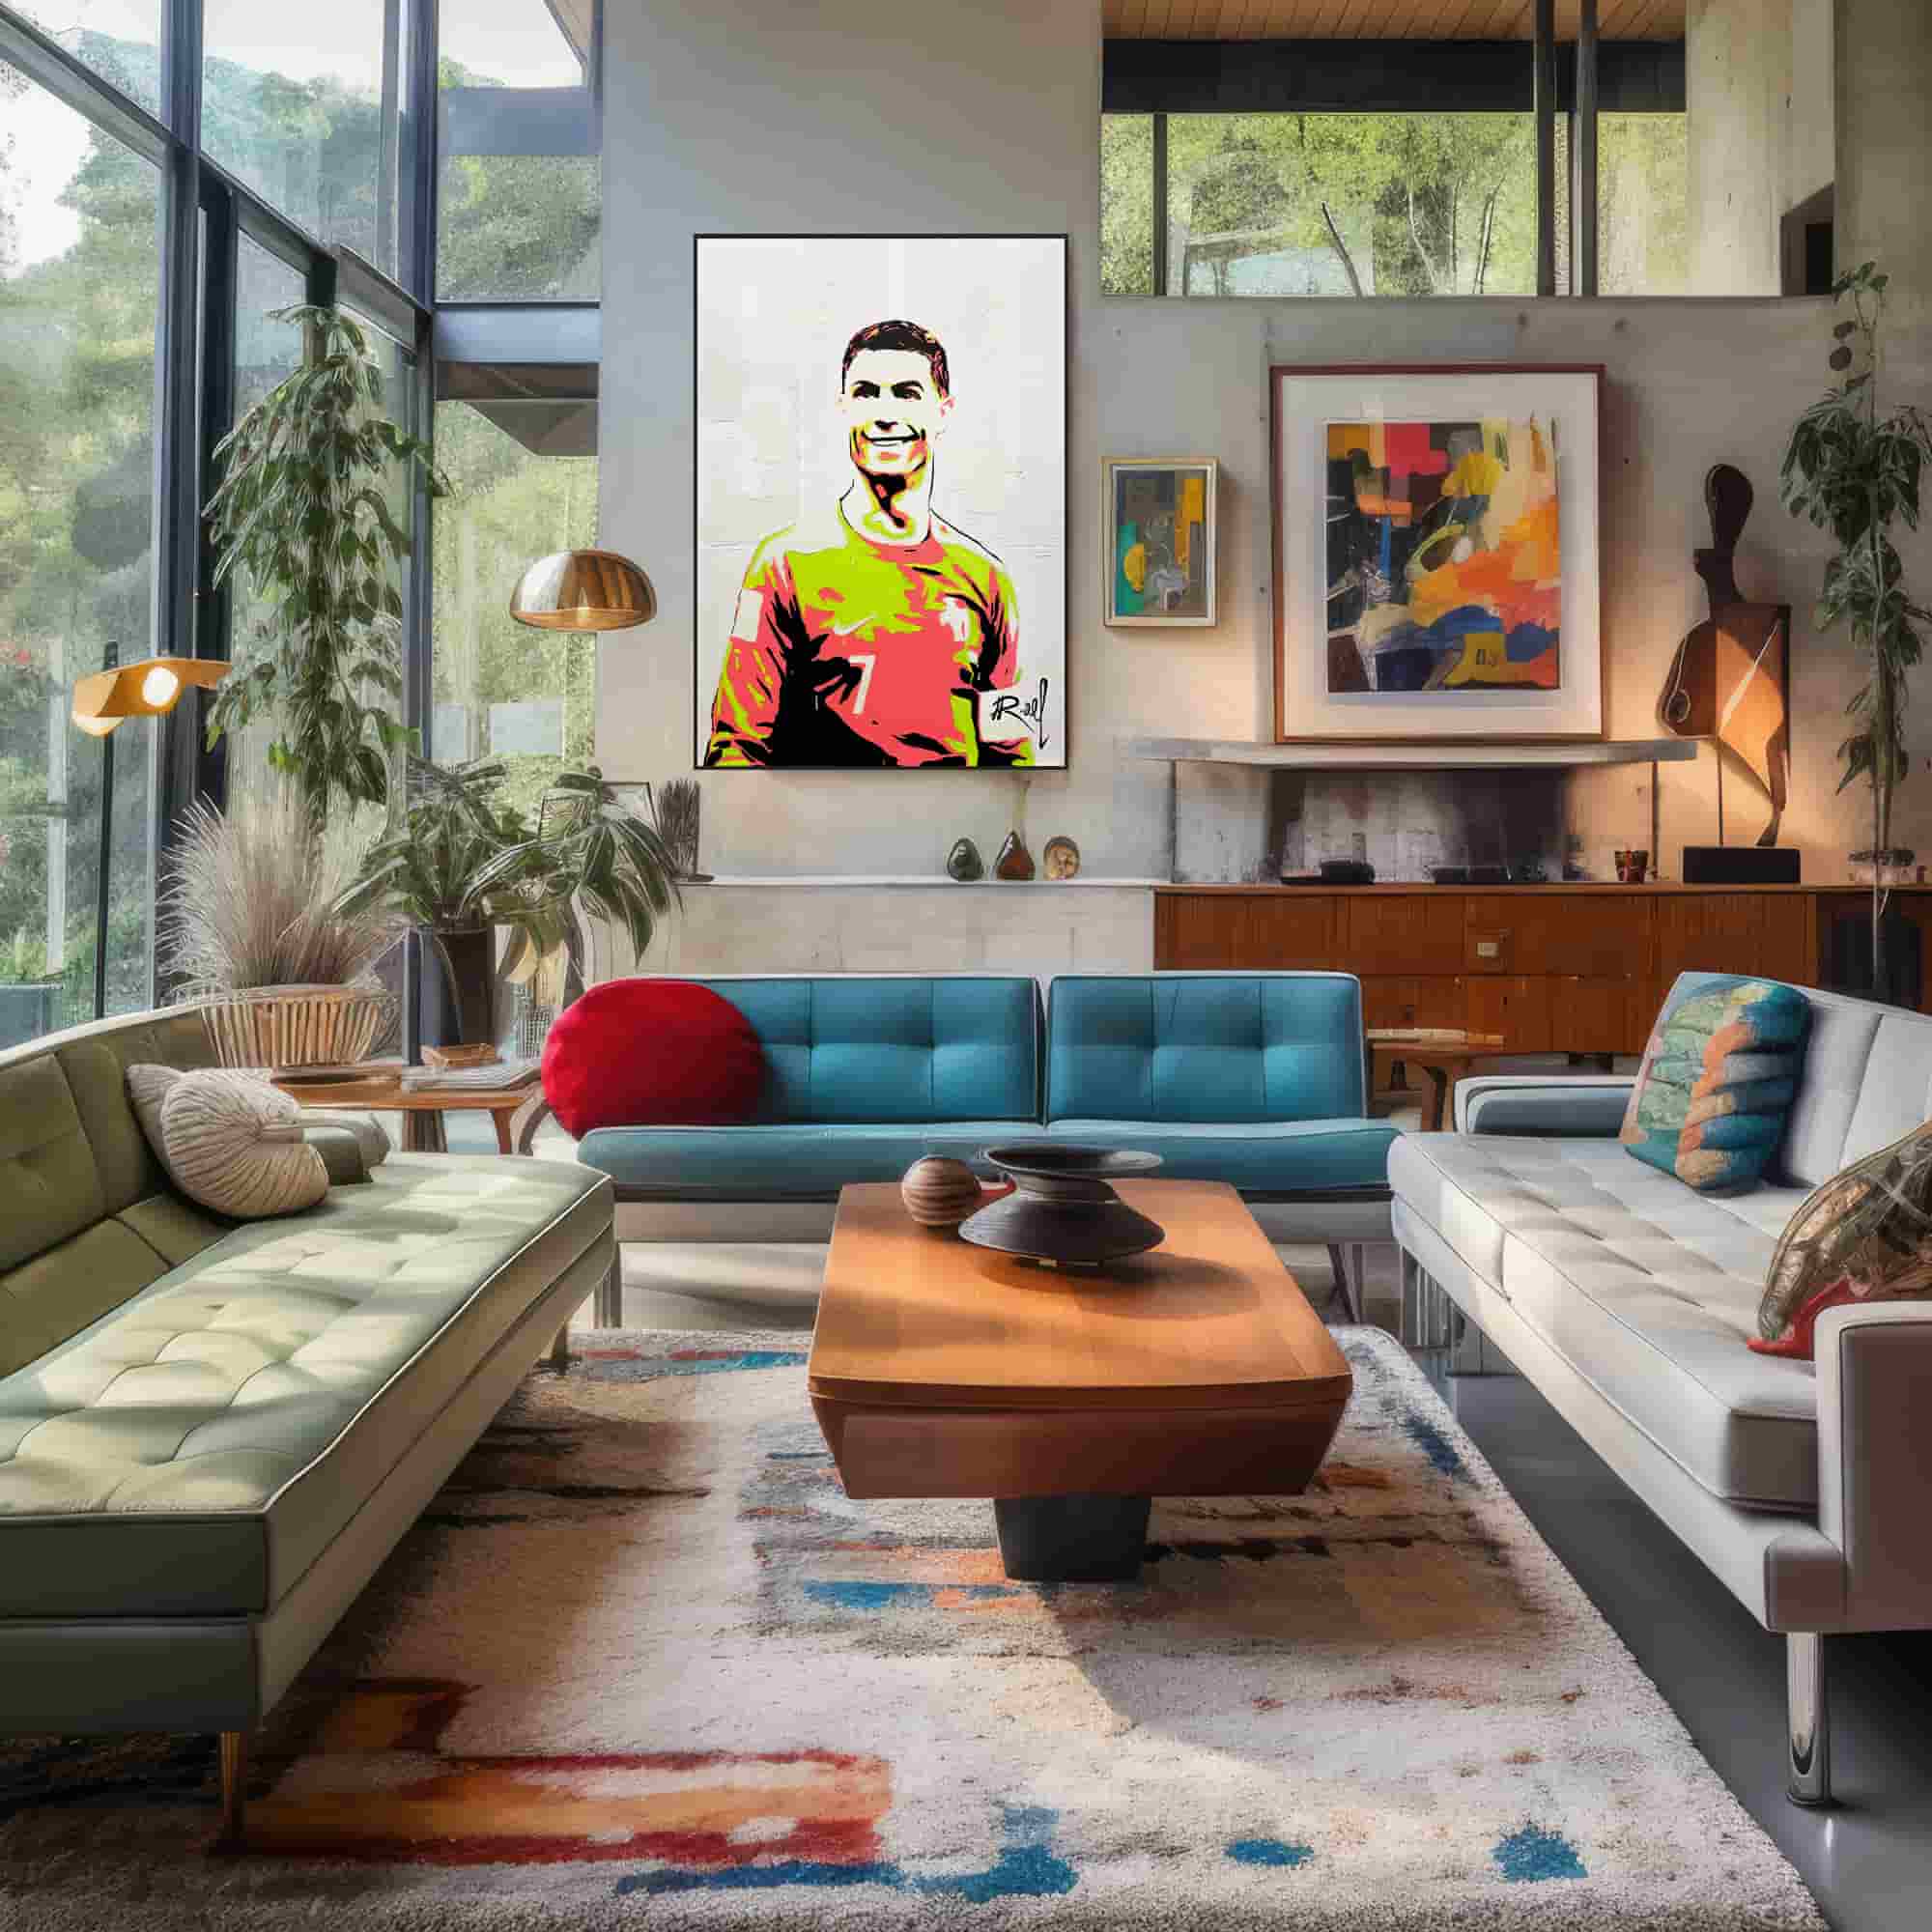 Glow in the dark Cristiano Ronaldo painting hanging in a modern Livingroom